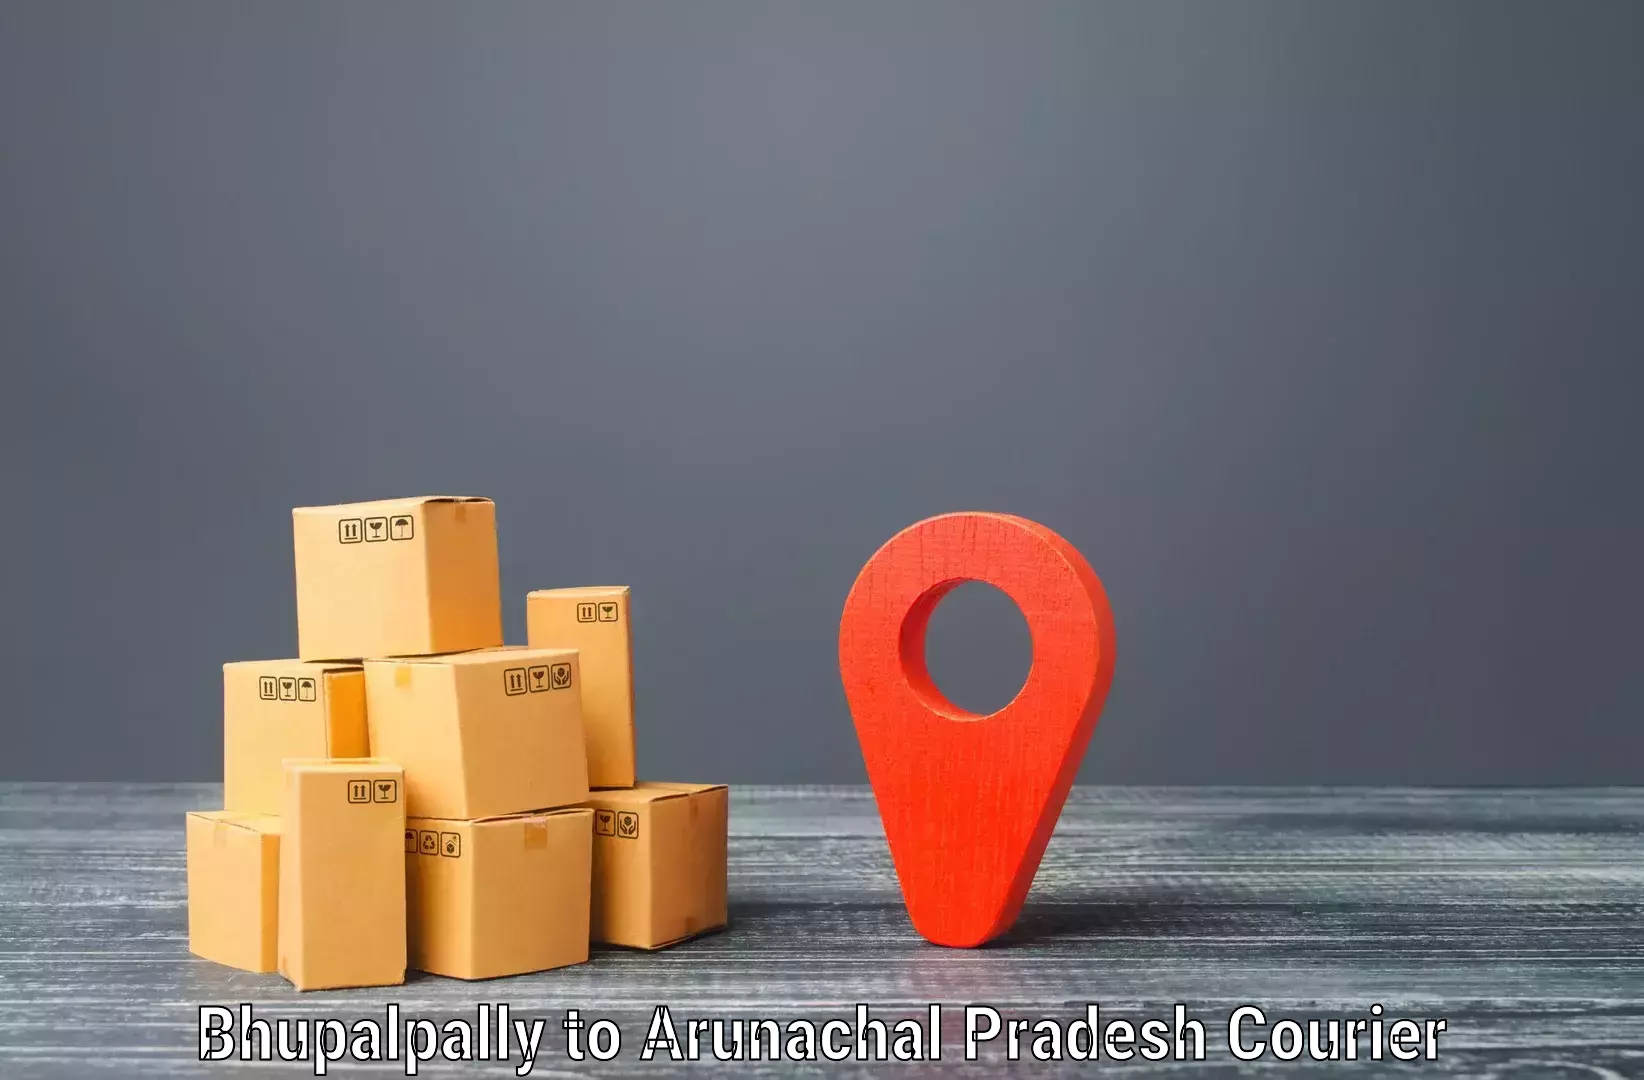 Express delivery capabilities Bhupalpally to Chowkham